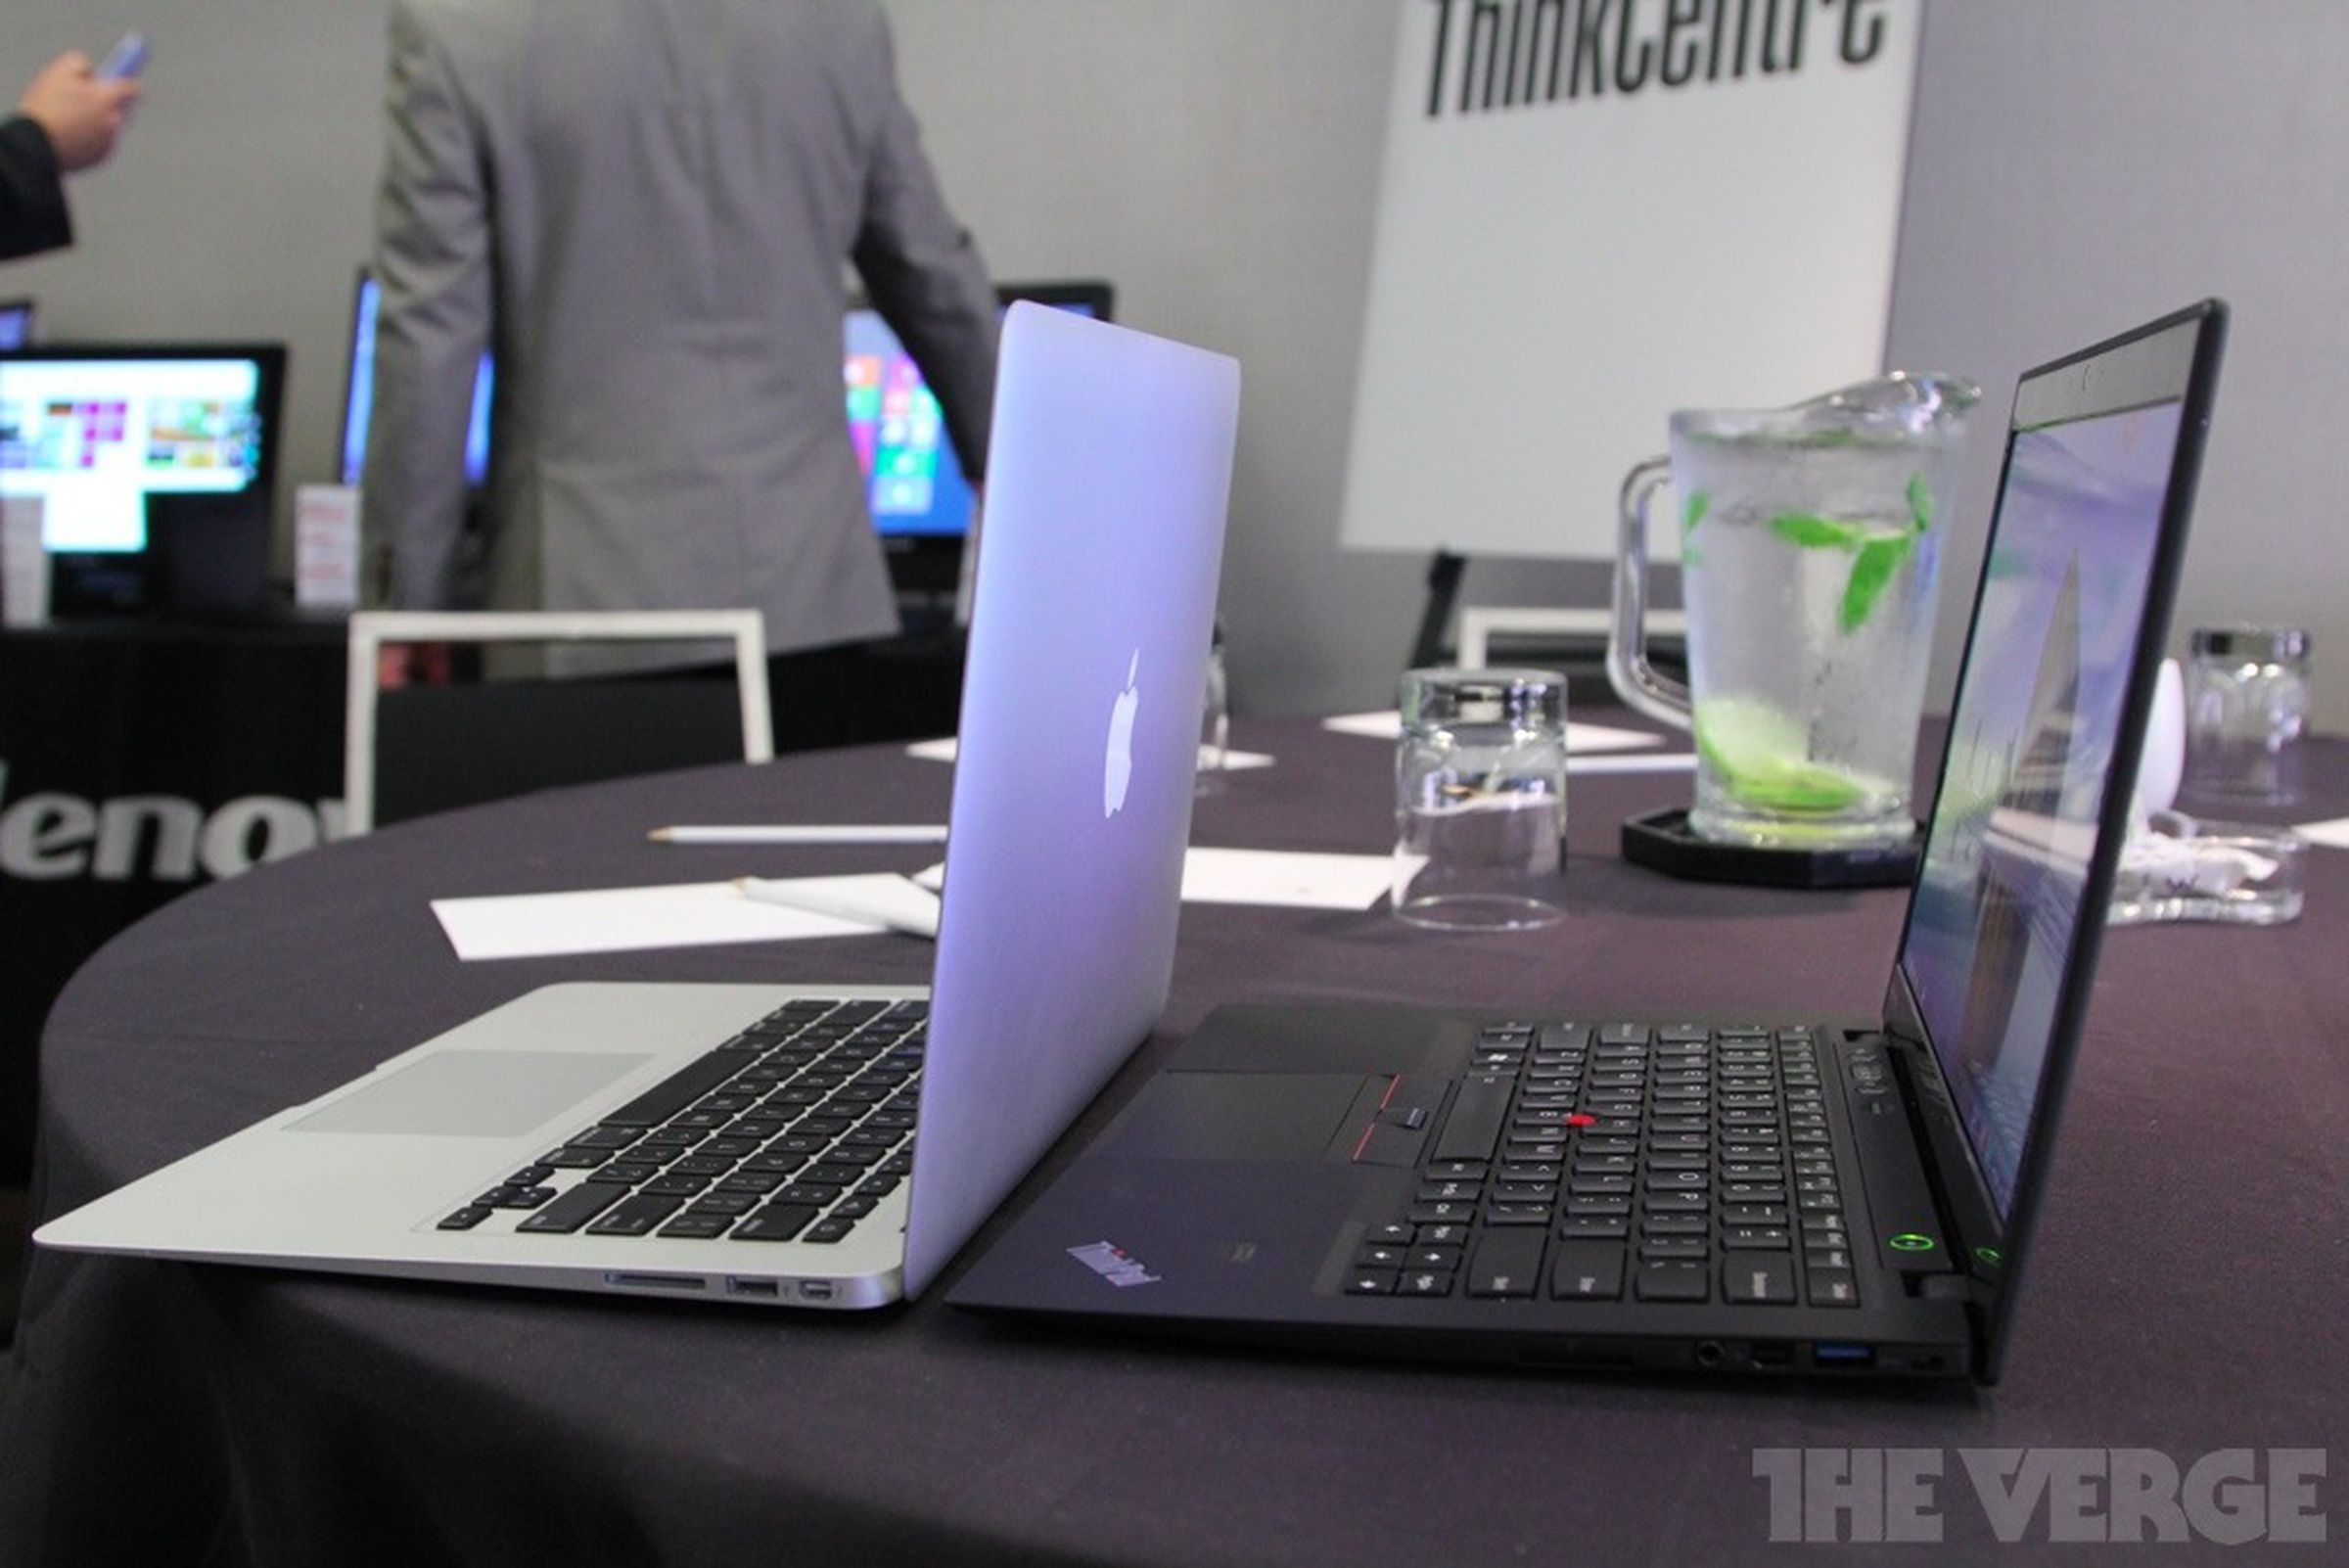 Lenovo ThinkPad X1 Carbon hands-on pictures